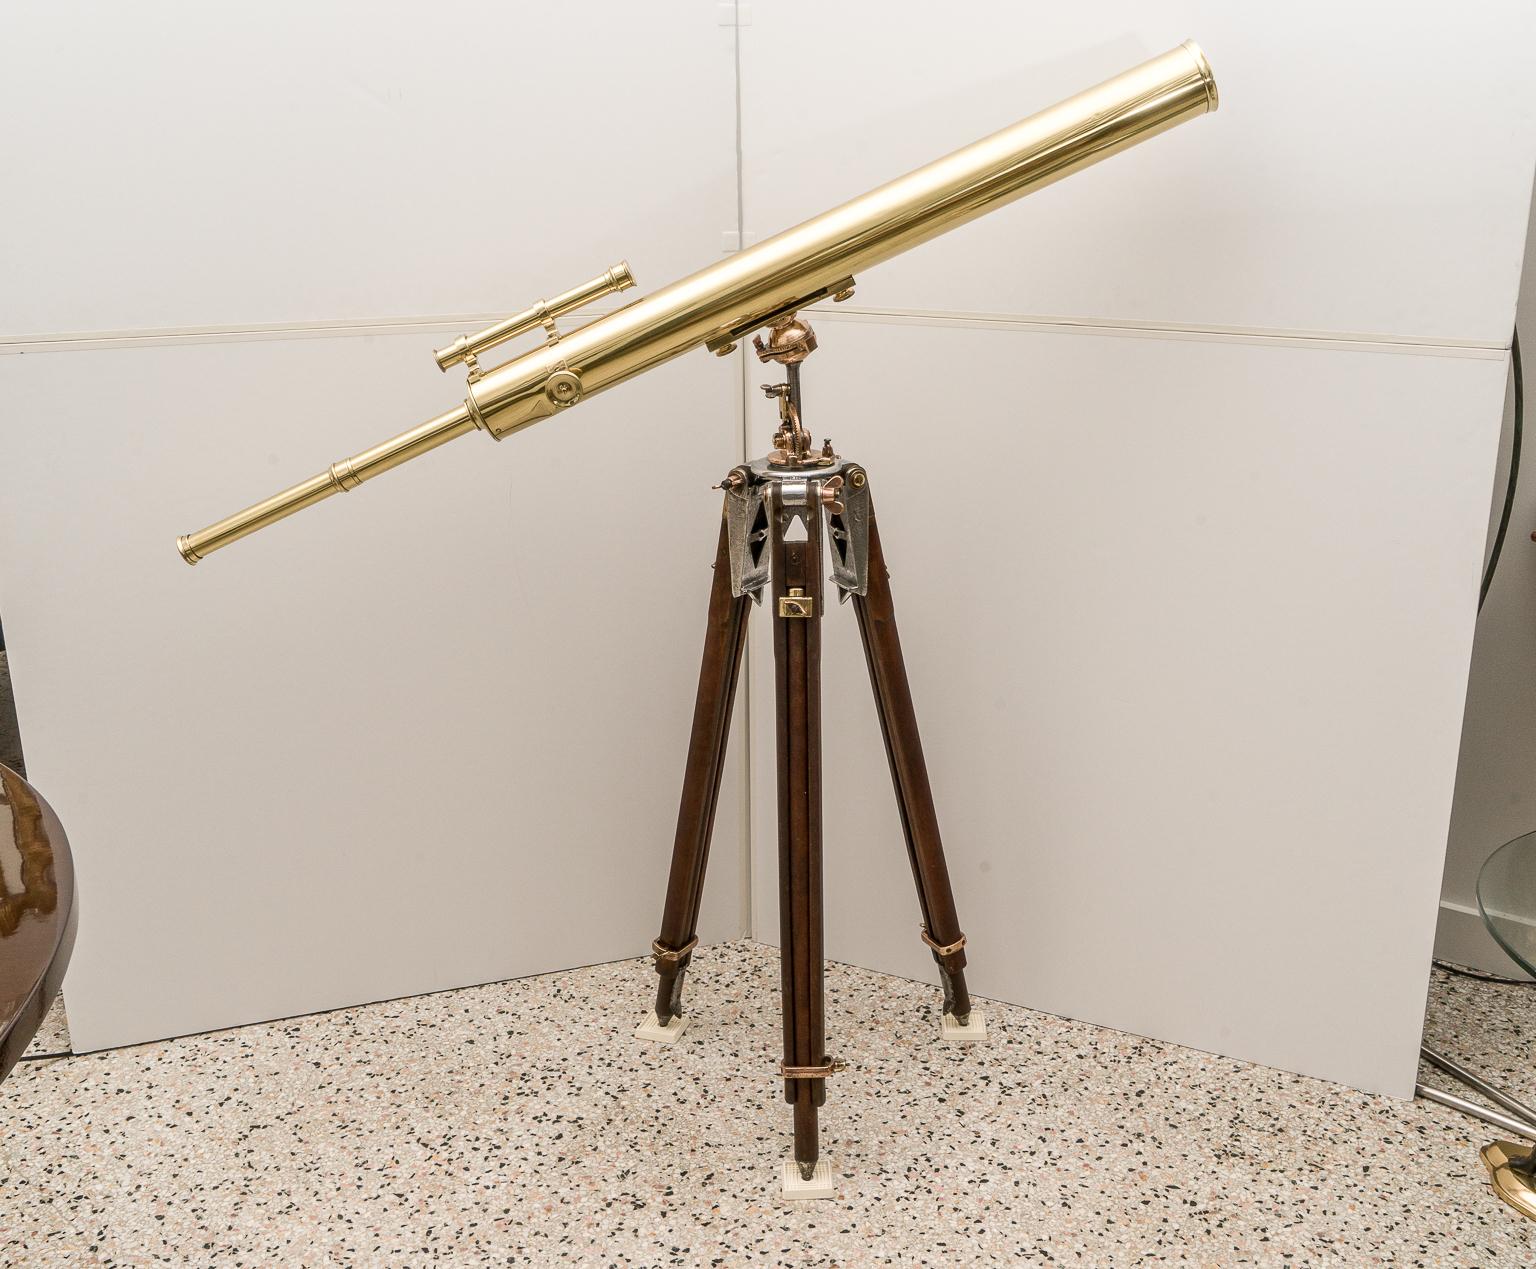 19th century telescope in polished brass by Broadhurst Clarkson London England acquired from a Palm Beach estate. A smaller Broadhurst telescope is in the collection of the Smithsonian National History Museum, Washington DC.. Broadhurst & Clarkson,